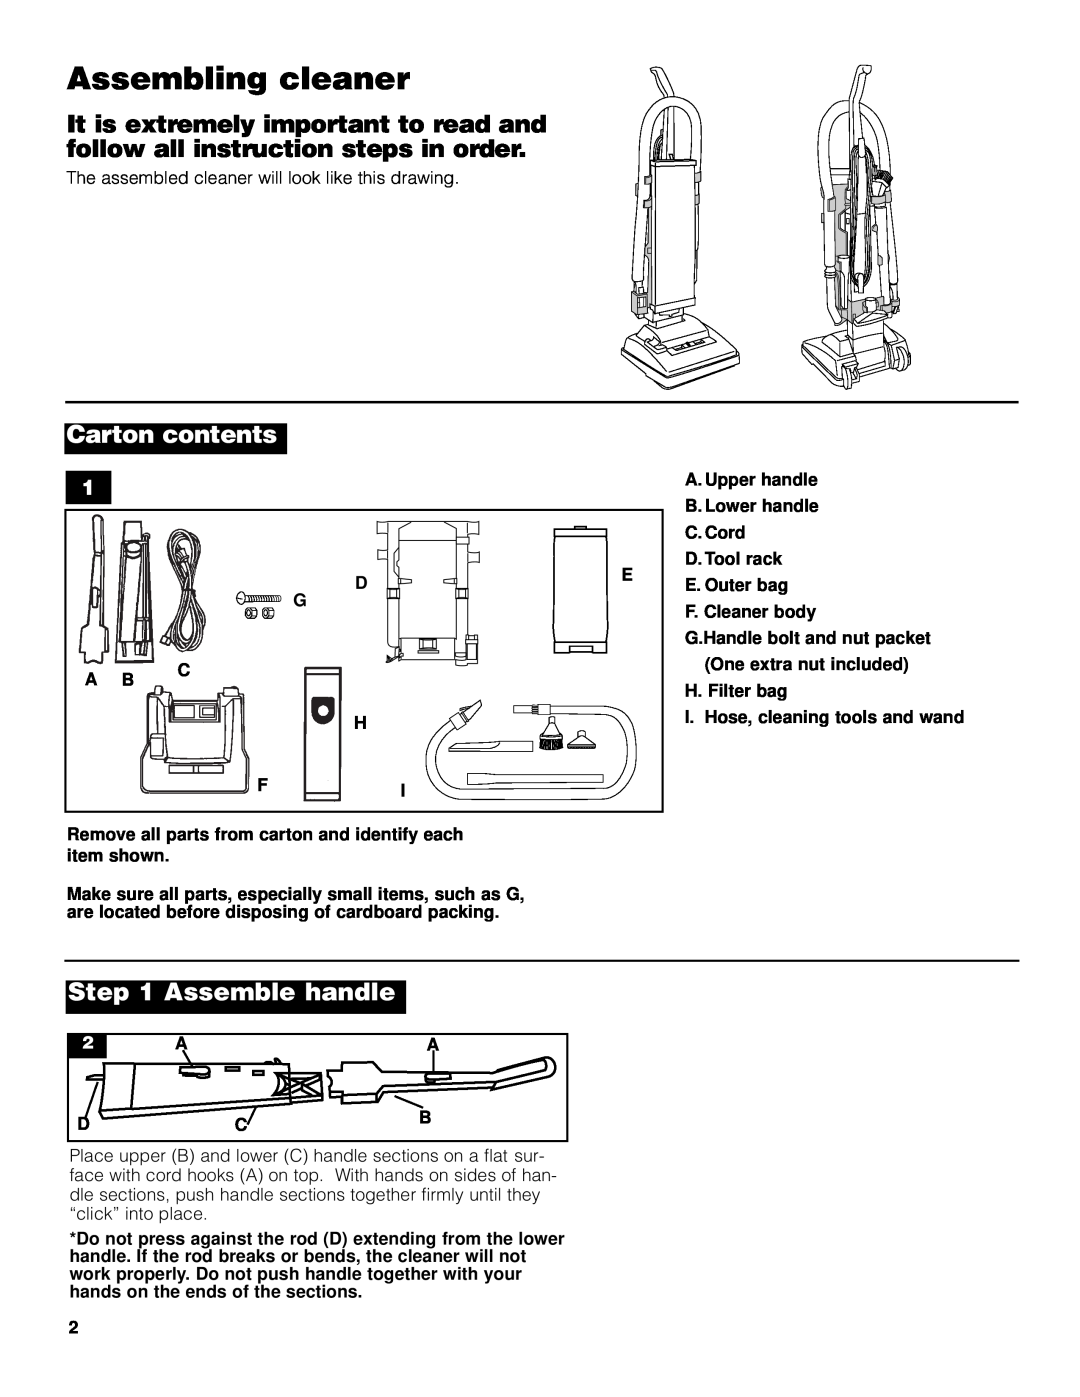 Pacific Digital Upright Vacuum Cleaner warranty Assembling cleaner, Carton contents, Assemble handle 